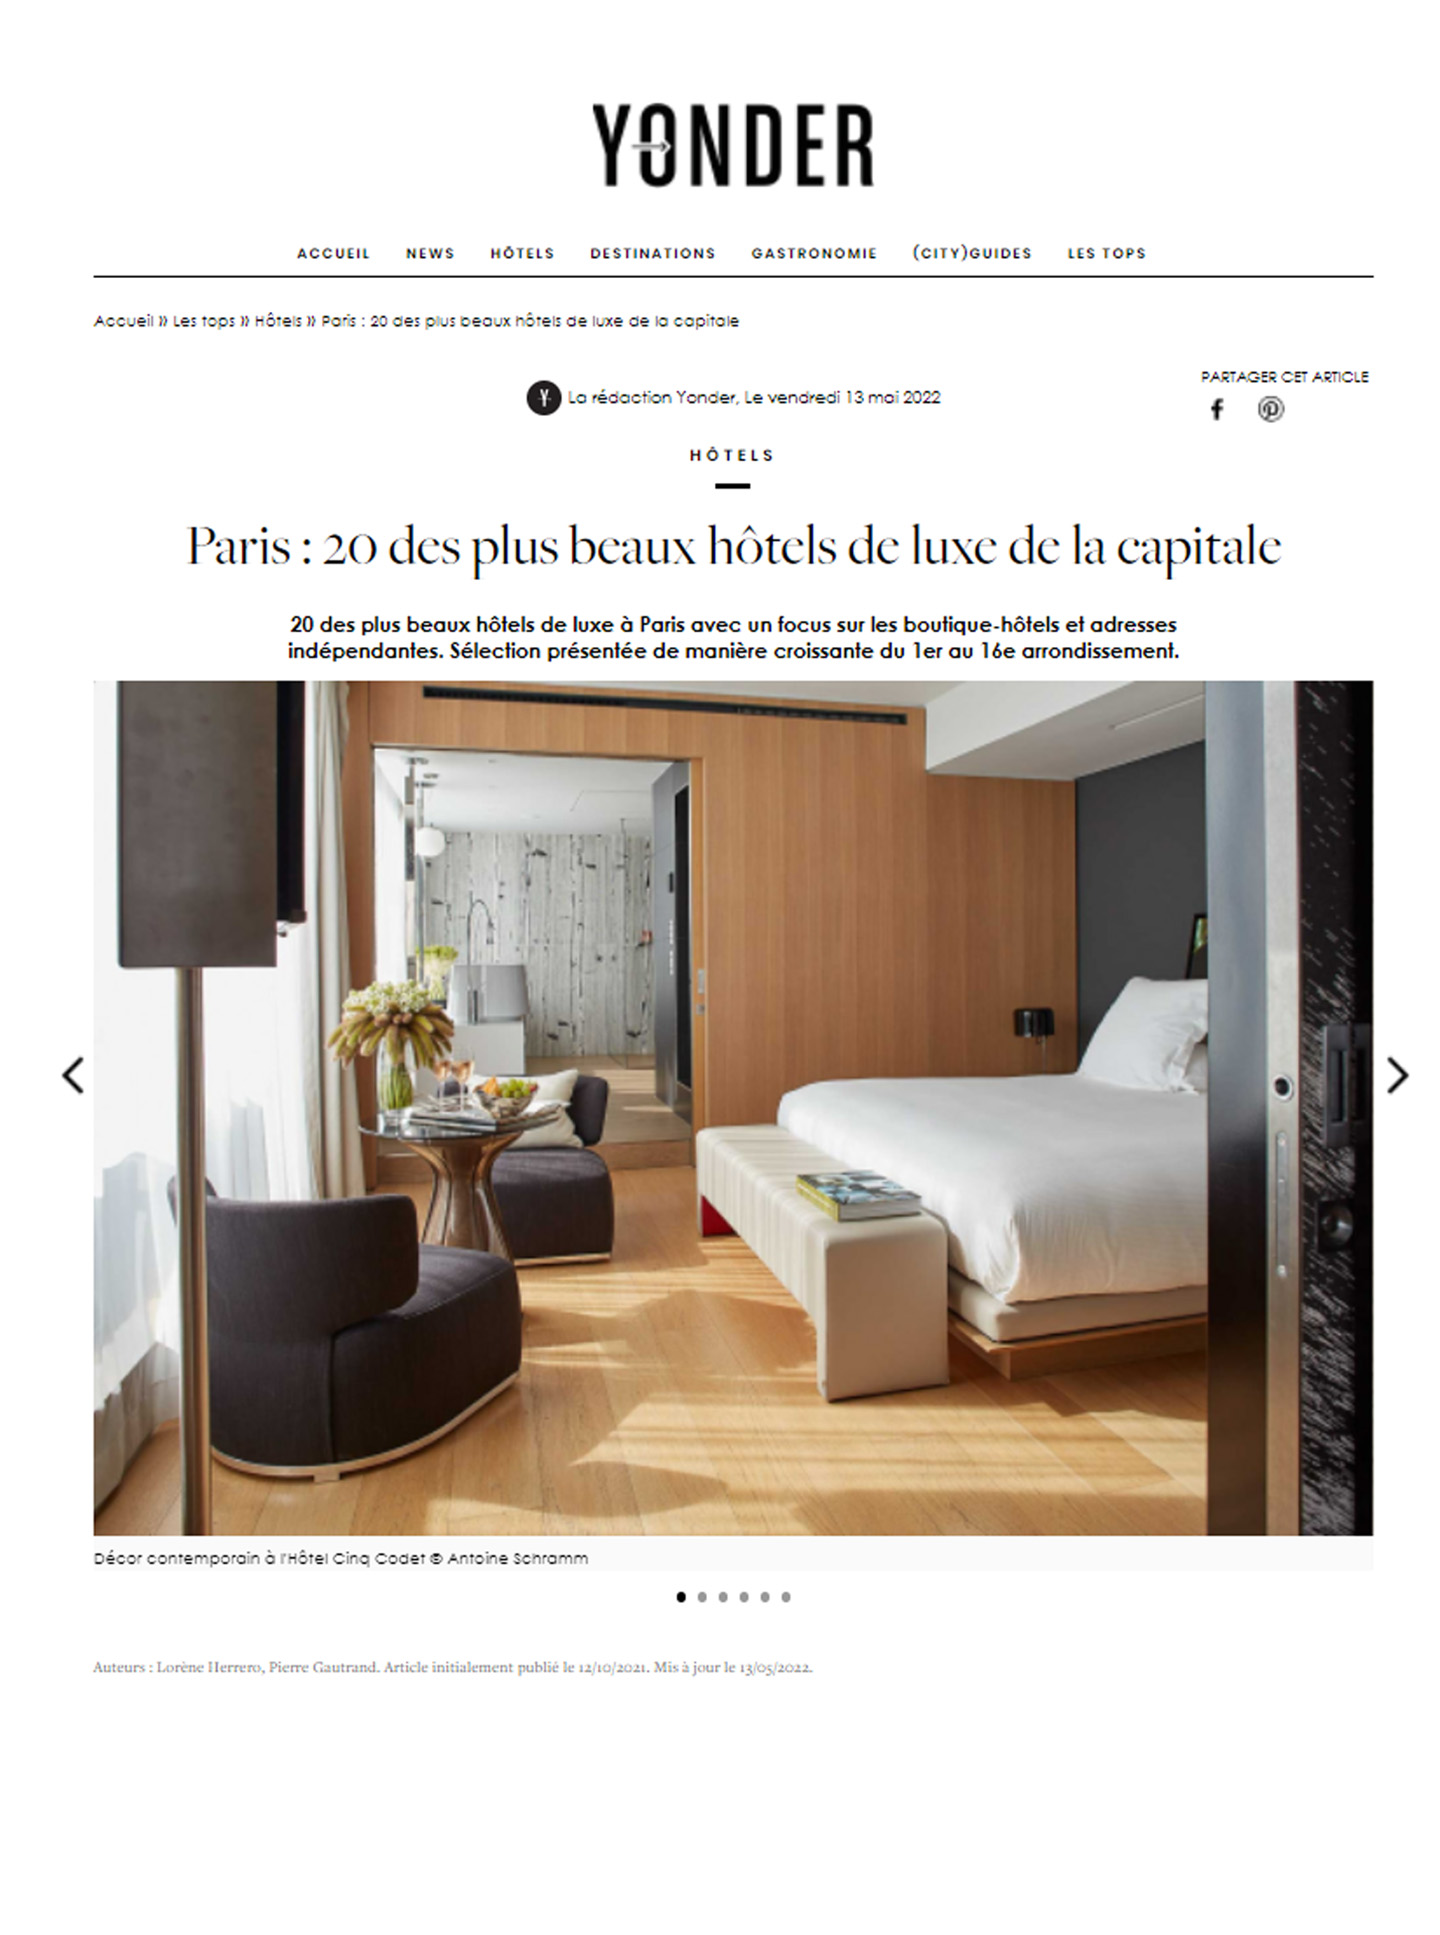 Article on the projects of the studio jean-philippe nuel in the magazine yonder and on the success of the 5 star Lancaster hotel in Paris